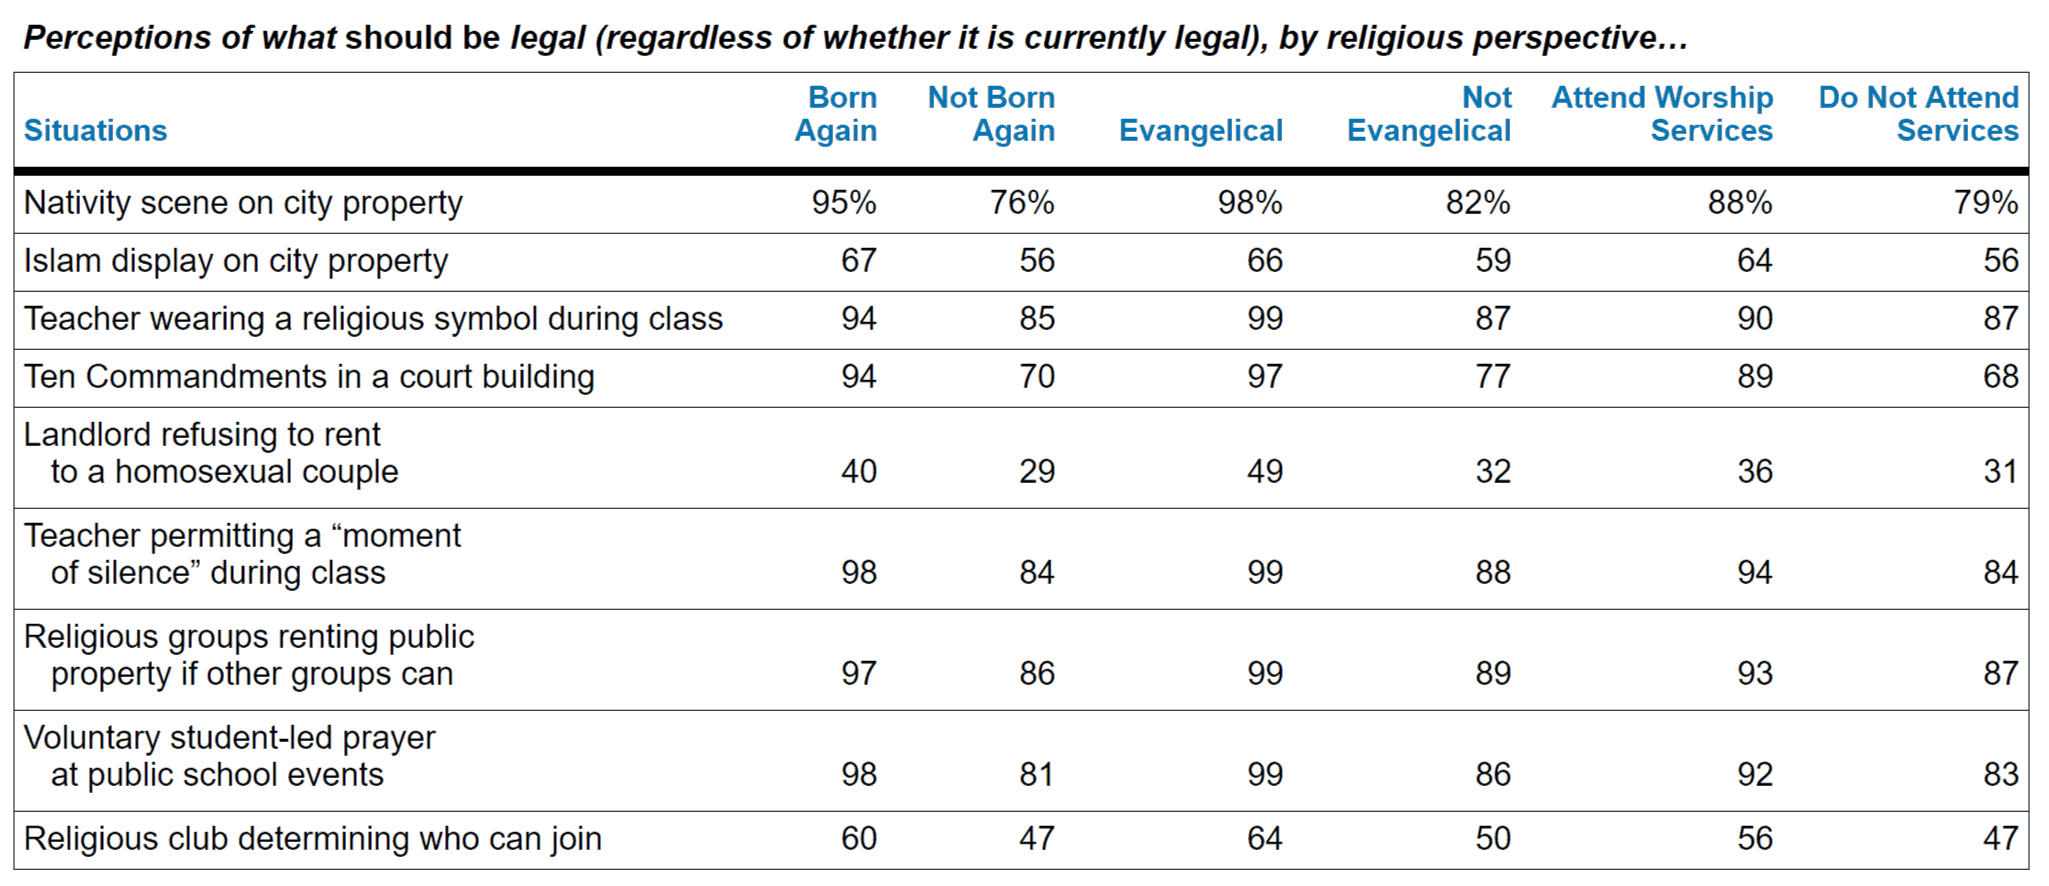 What should be legal when it comes to religion, morality, and the public arena?